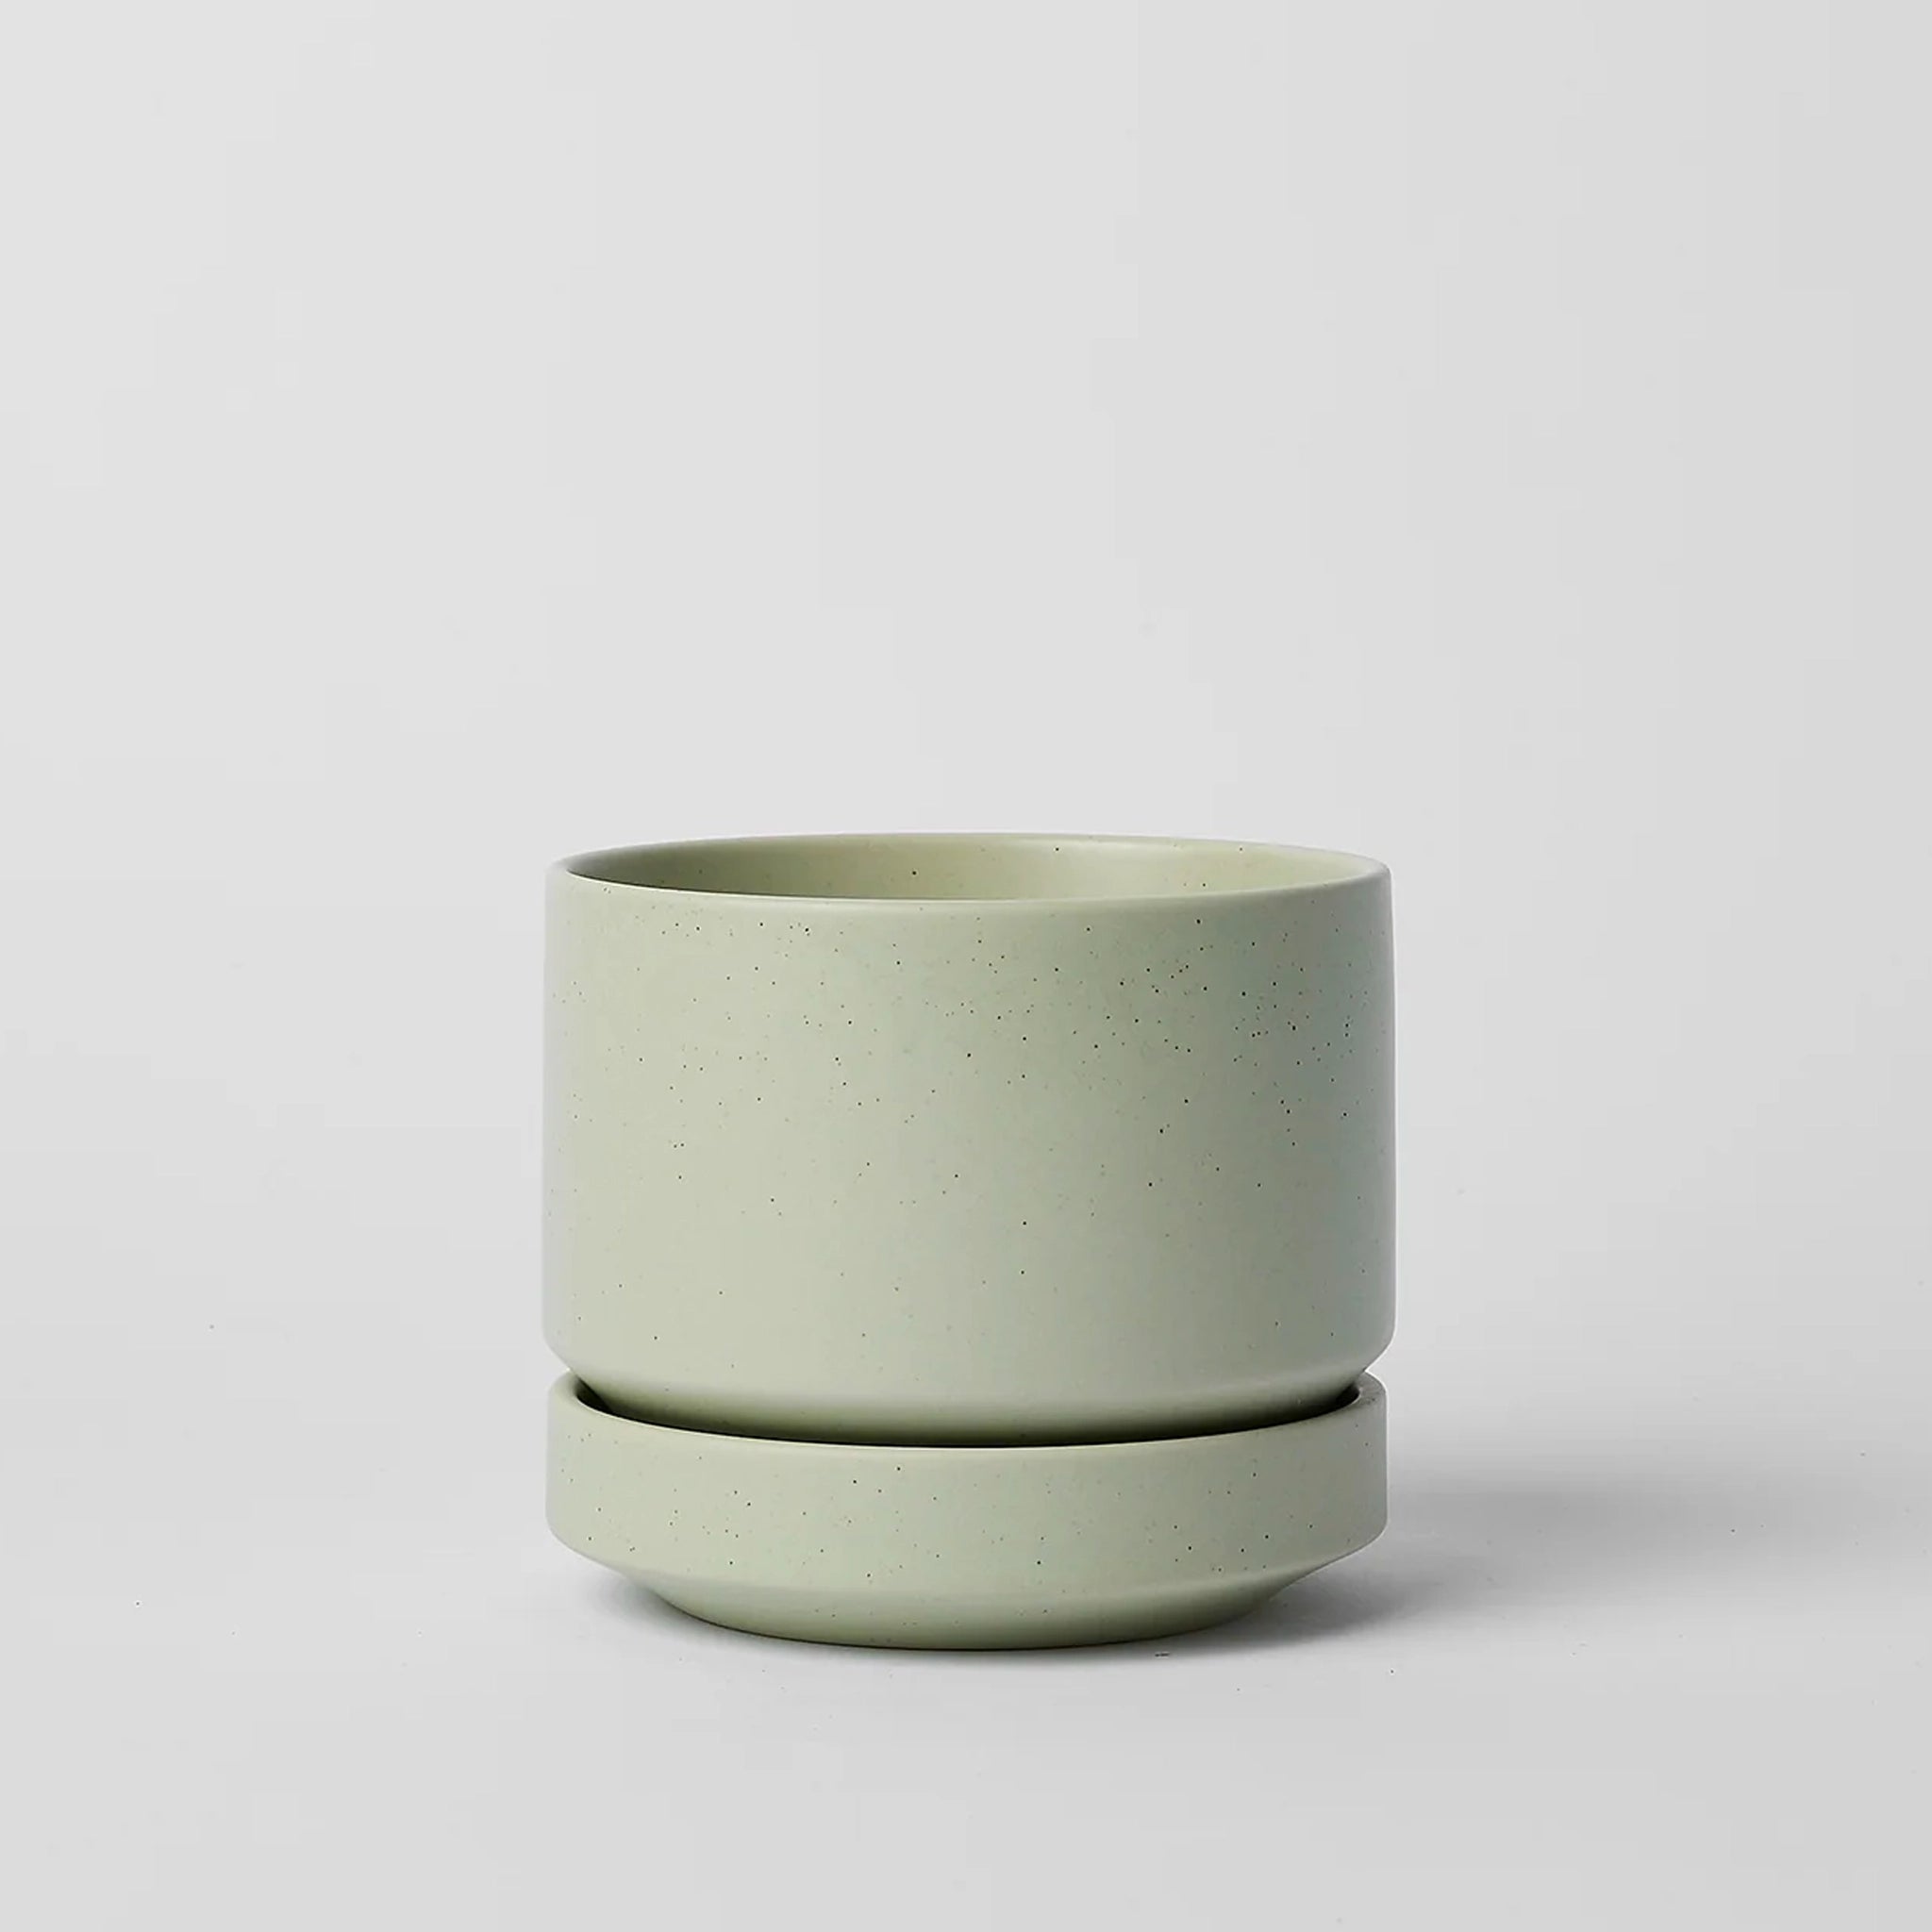 On a neutral background is a mint green speckled ceramic planter with a removable tray for watering. 